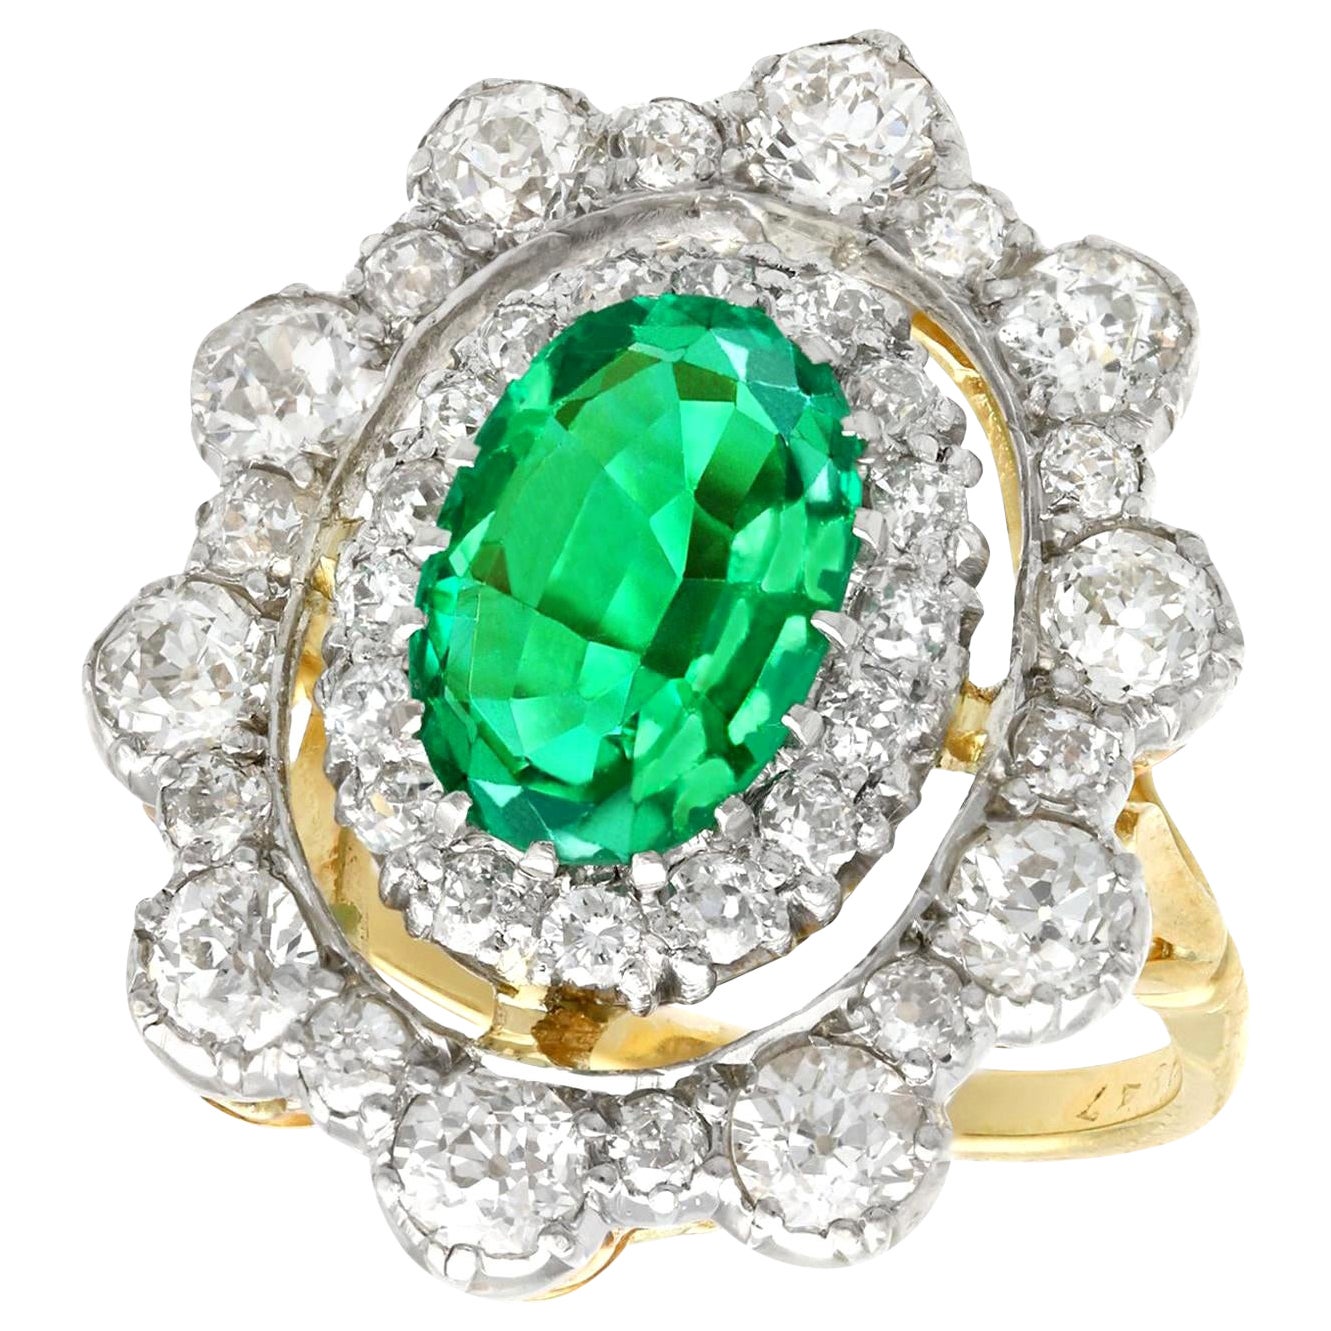 3.12 Carat Colombian Emerald and 3.15 Carat Diamond Yellow Gold Cocktail Ring